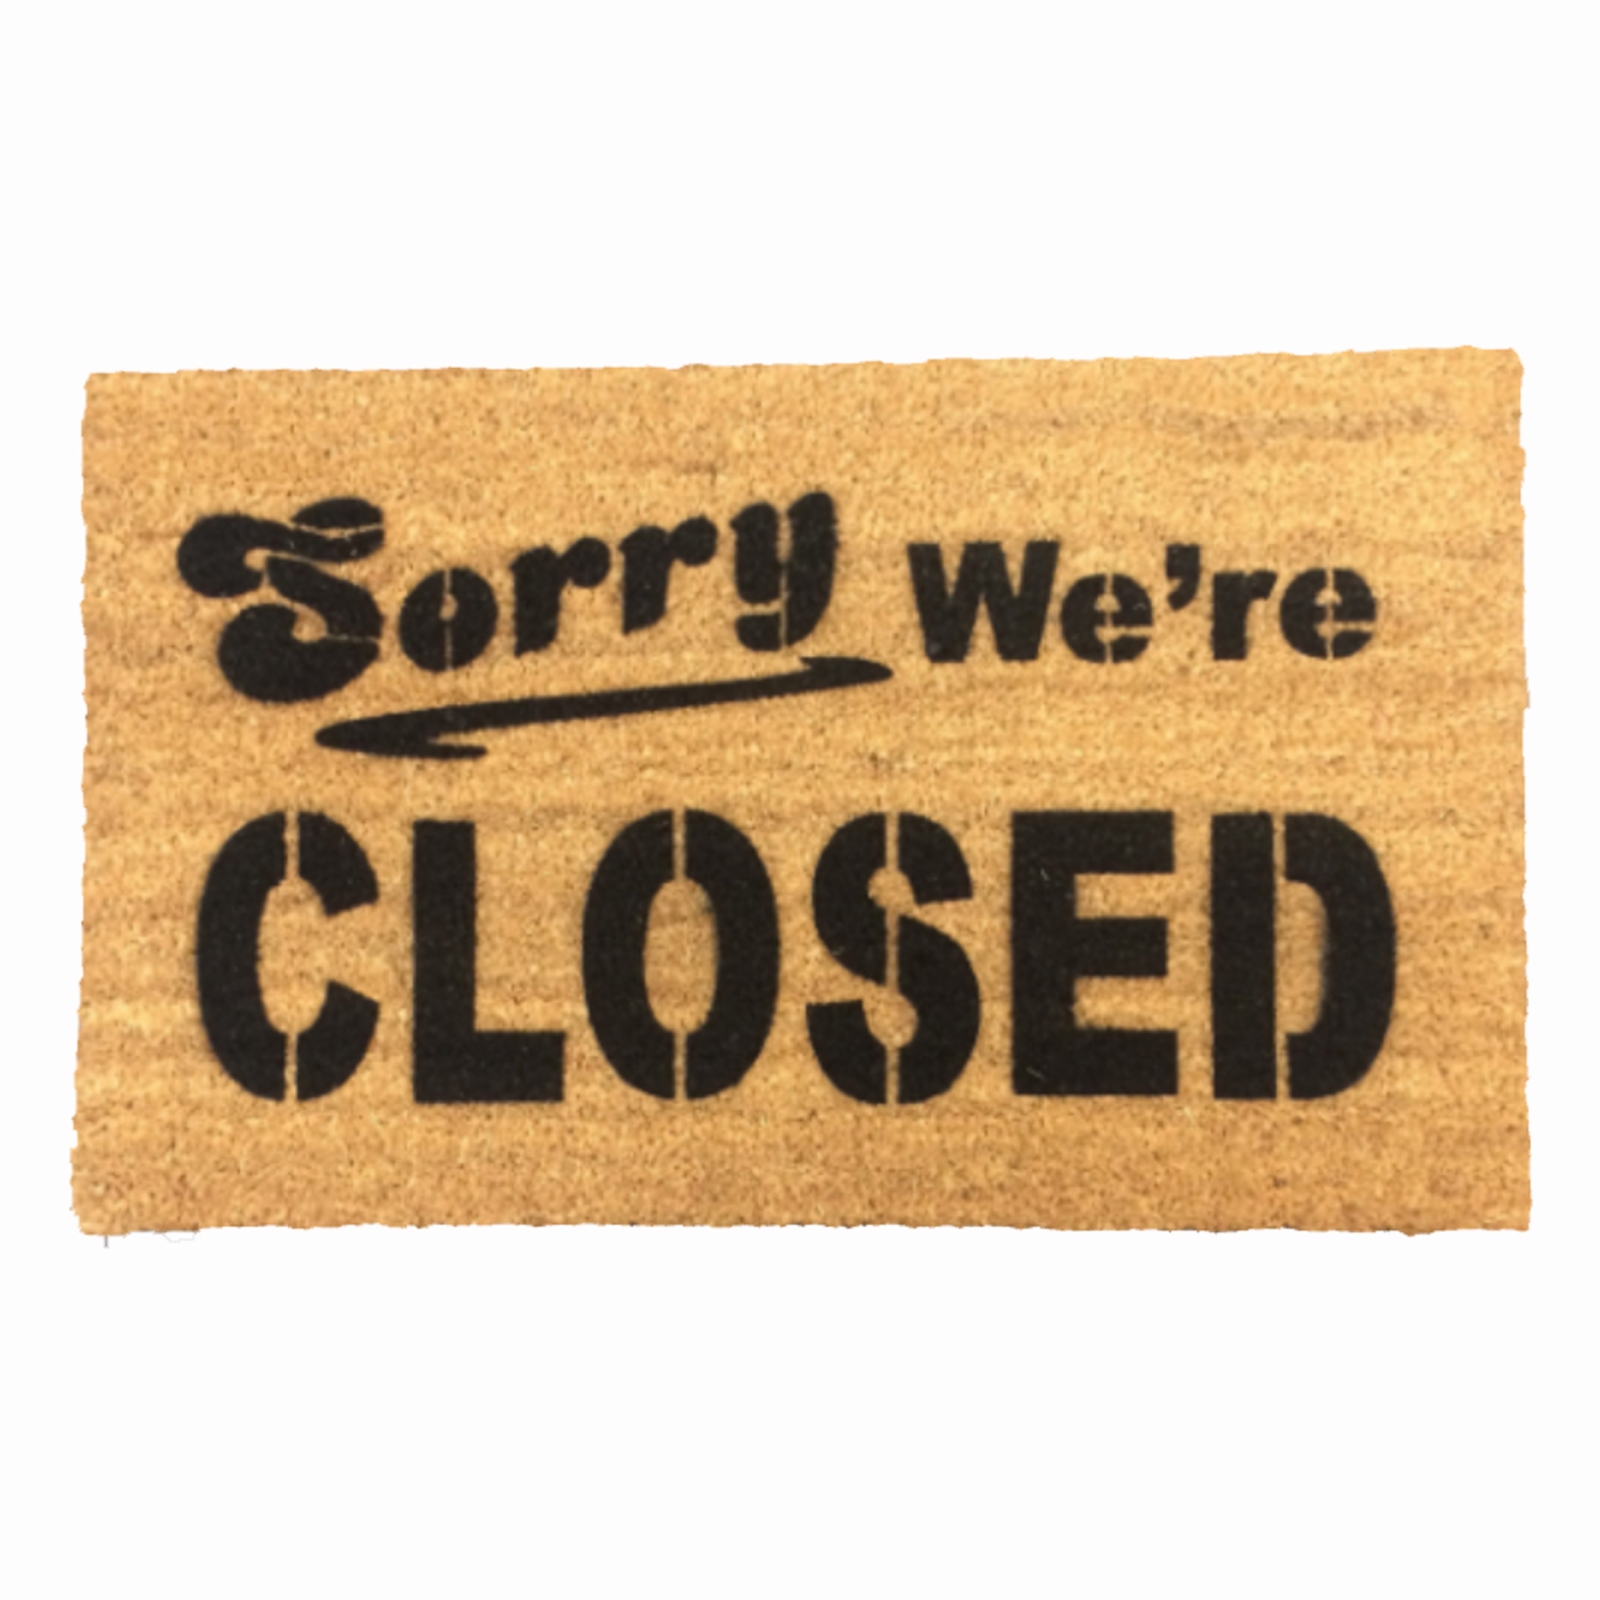 We re sorry those. Sorry we're closed. We're close. We're sorry for. We're.